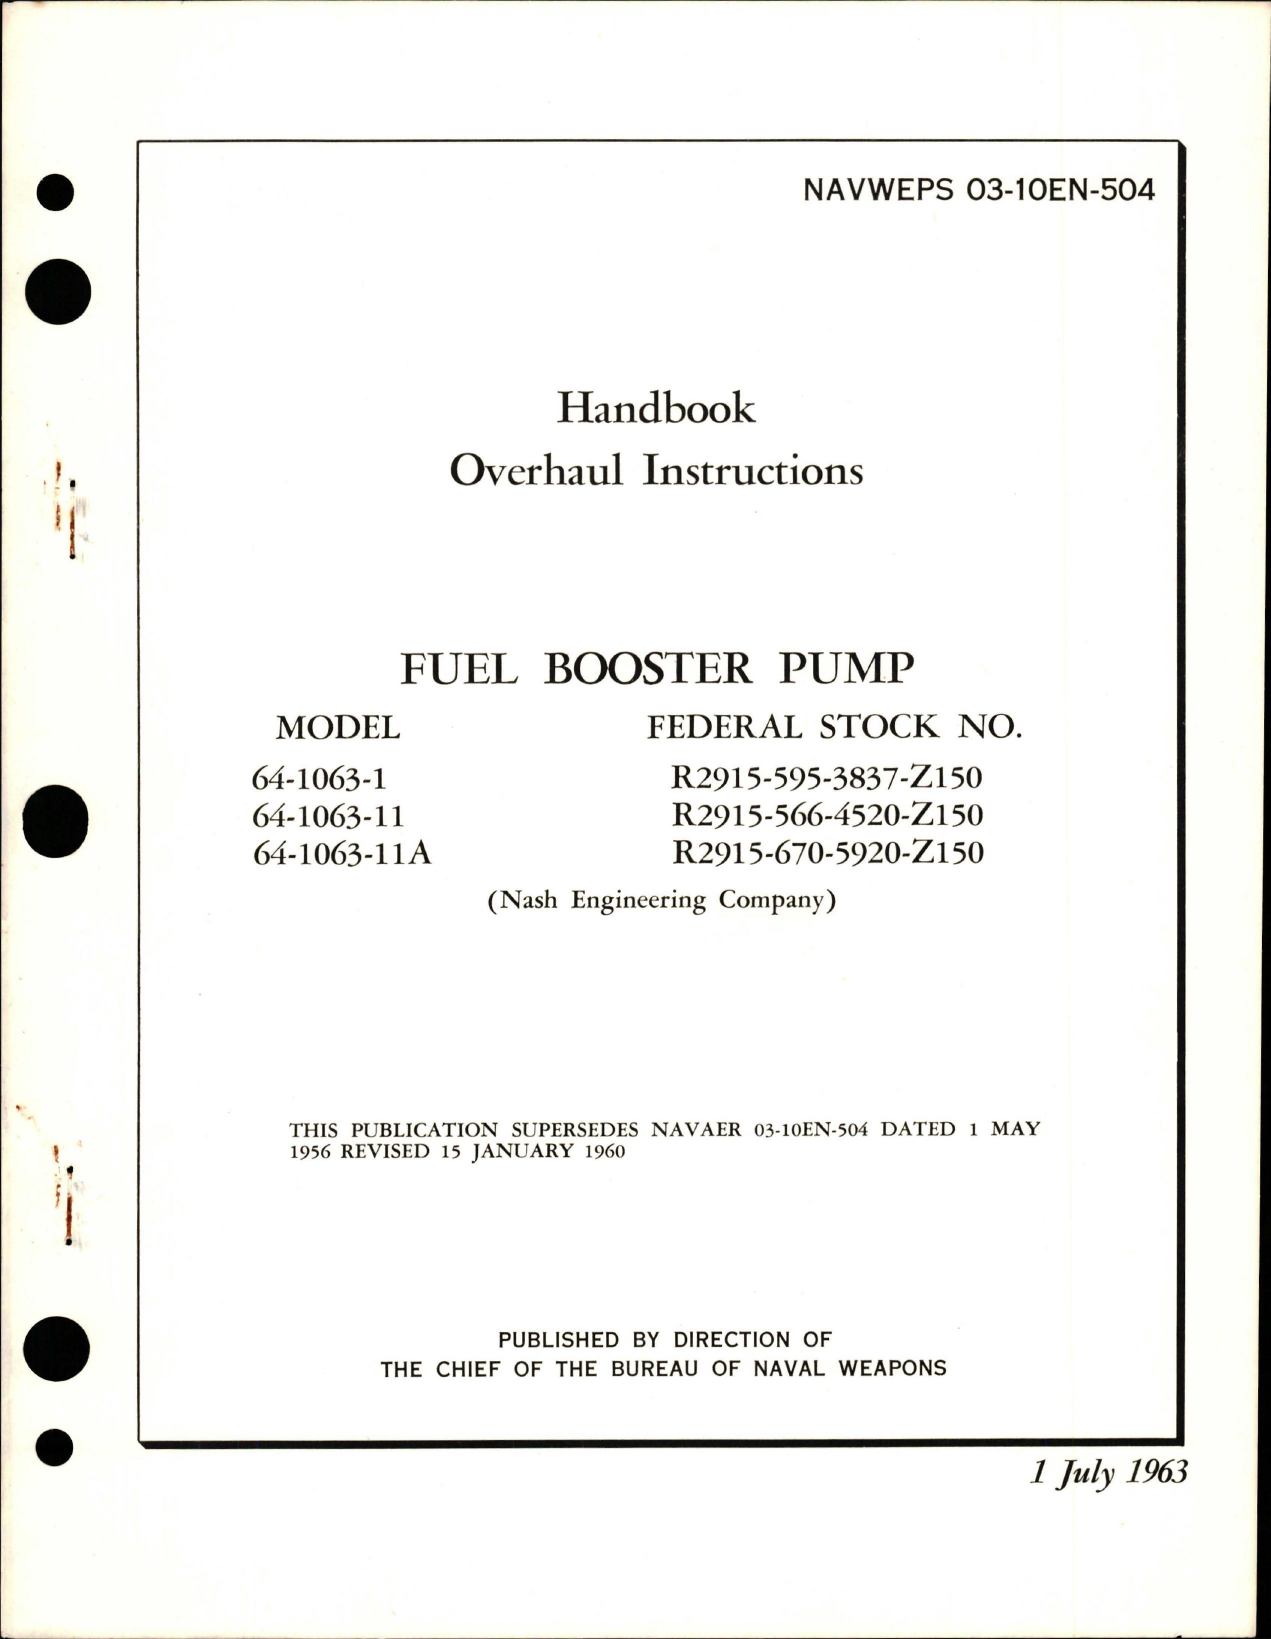 Sample page 1 from AirCorps Library document: Overhaul Instructions for Fuel Booster Pump - Models 64-1063-1, 64-1063-11, and 641063-11A